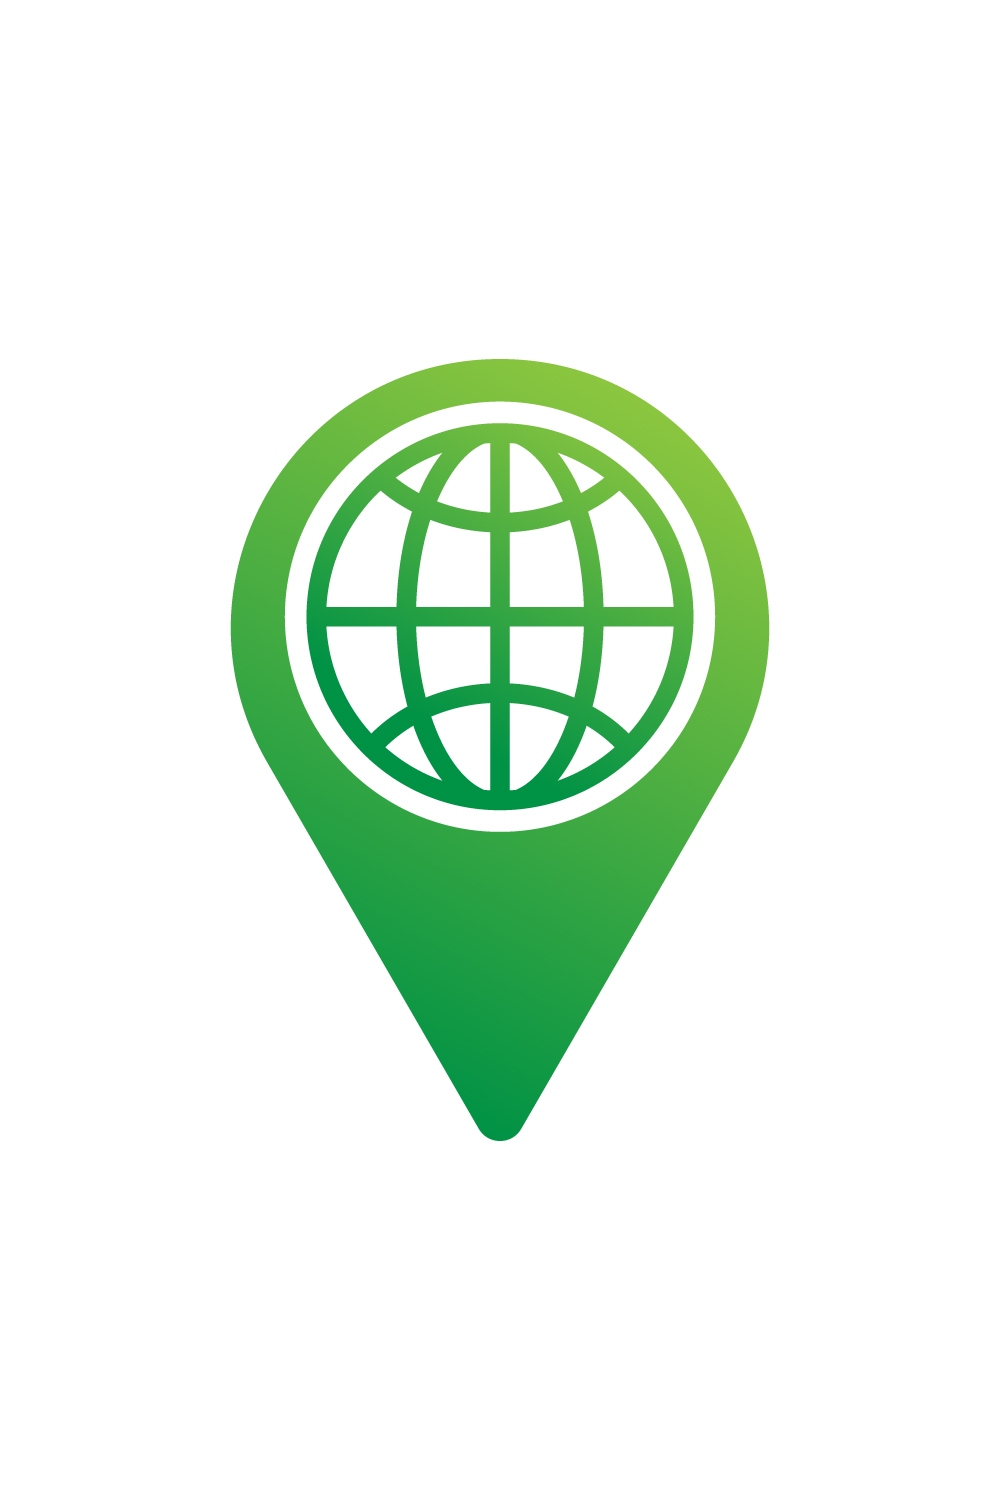 Initials Location logo design vector images World Map logo design Google map logo best icon template illustration Tracking icon design pinterest preview image.